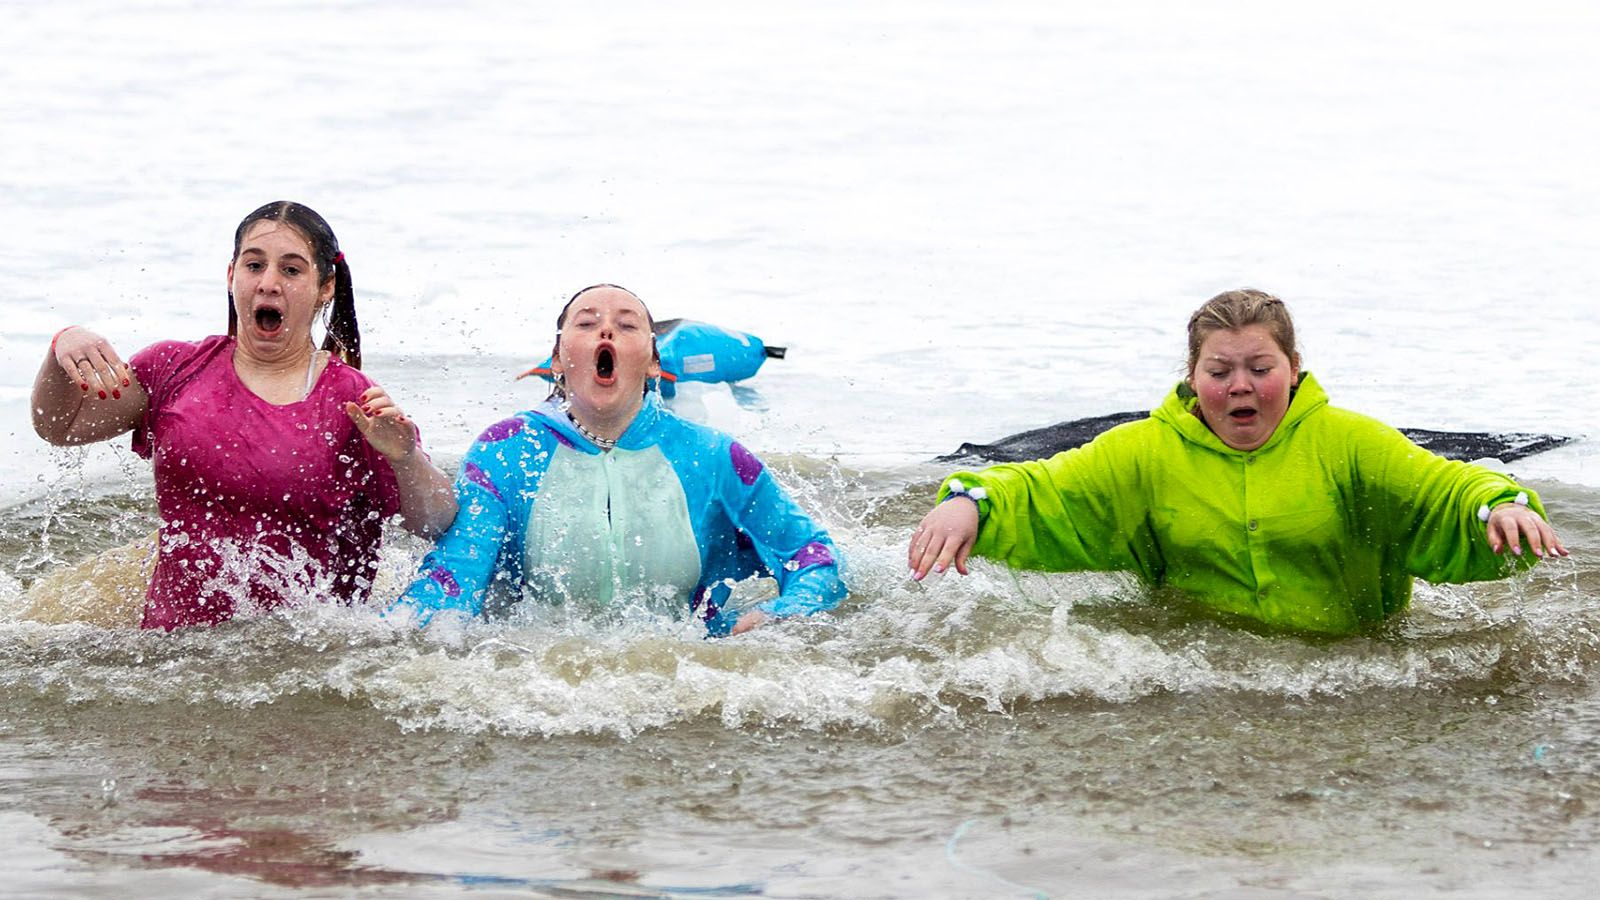 You take take part in the Special Olympics Polar Plunge on Feb. 11 at Meta County Park or Feb. 18 at Manchester University.